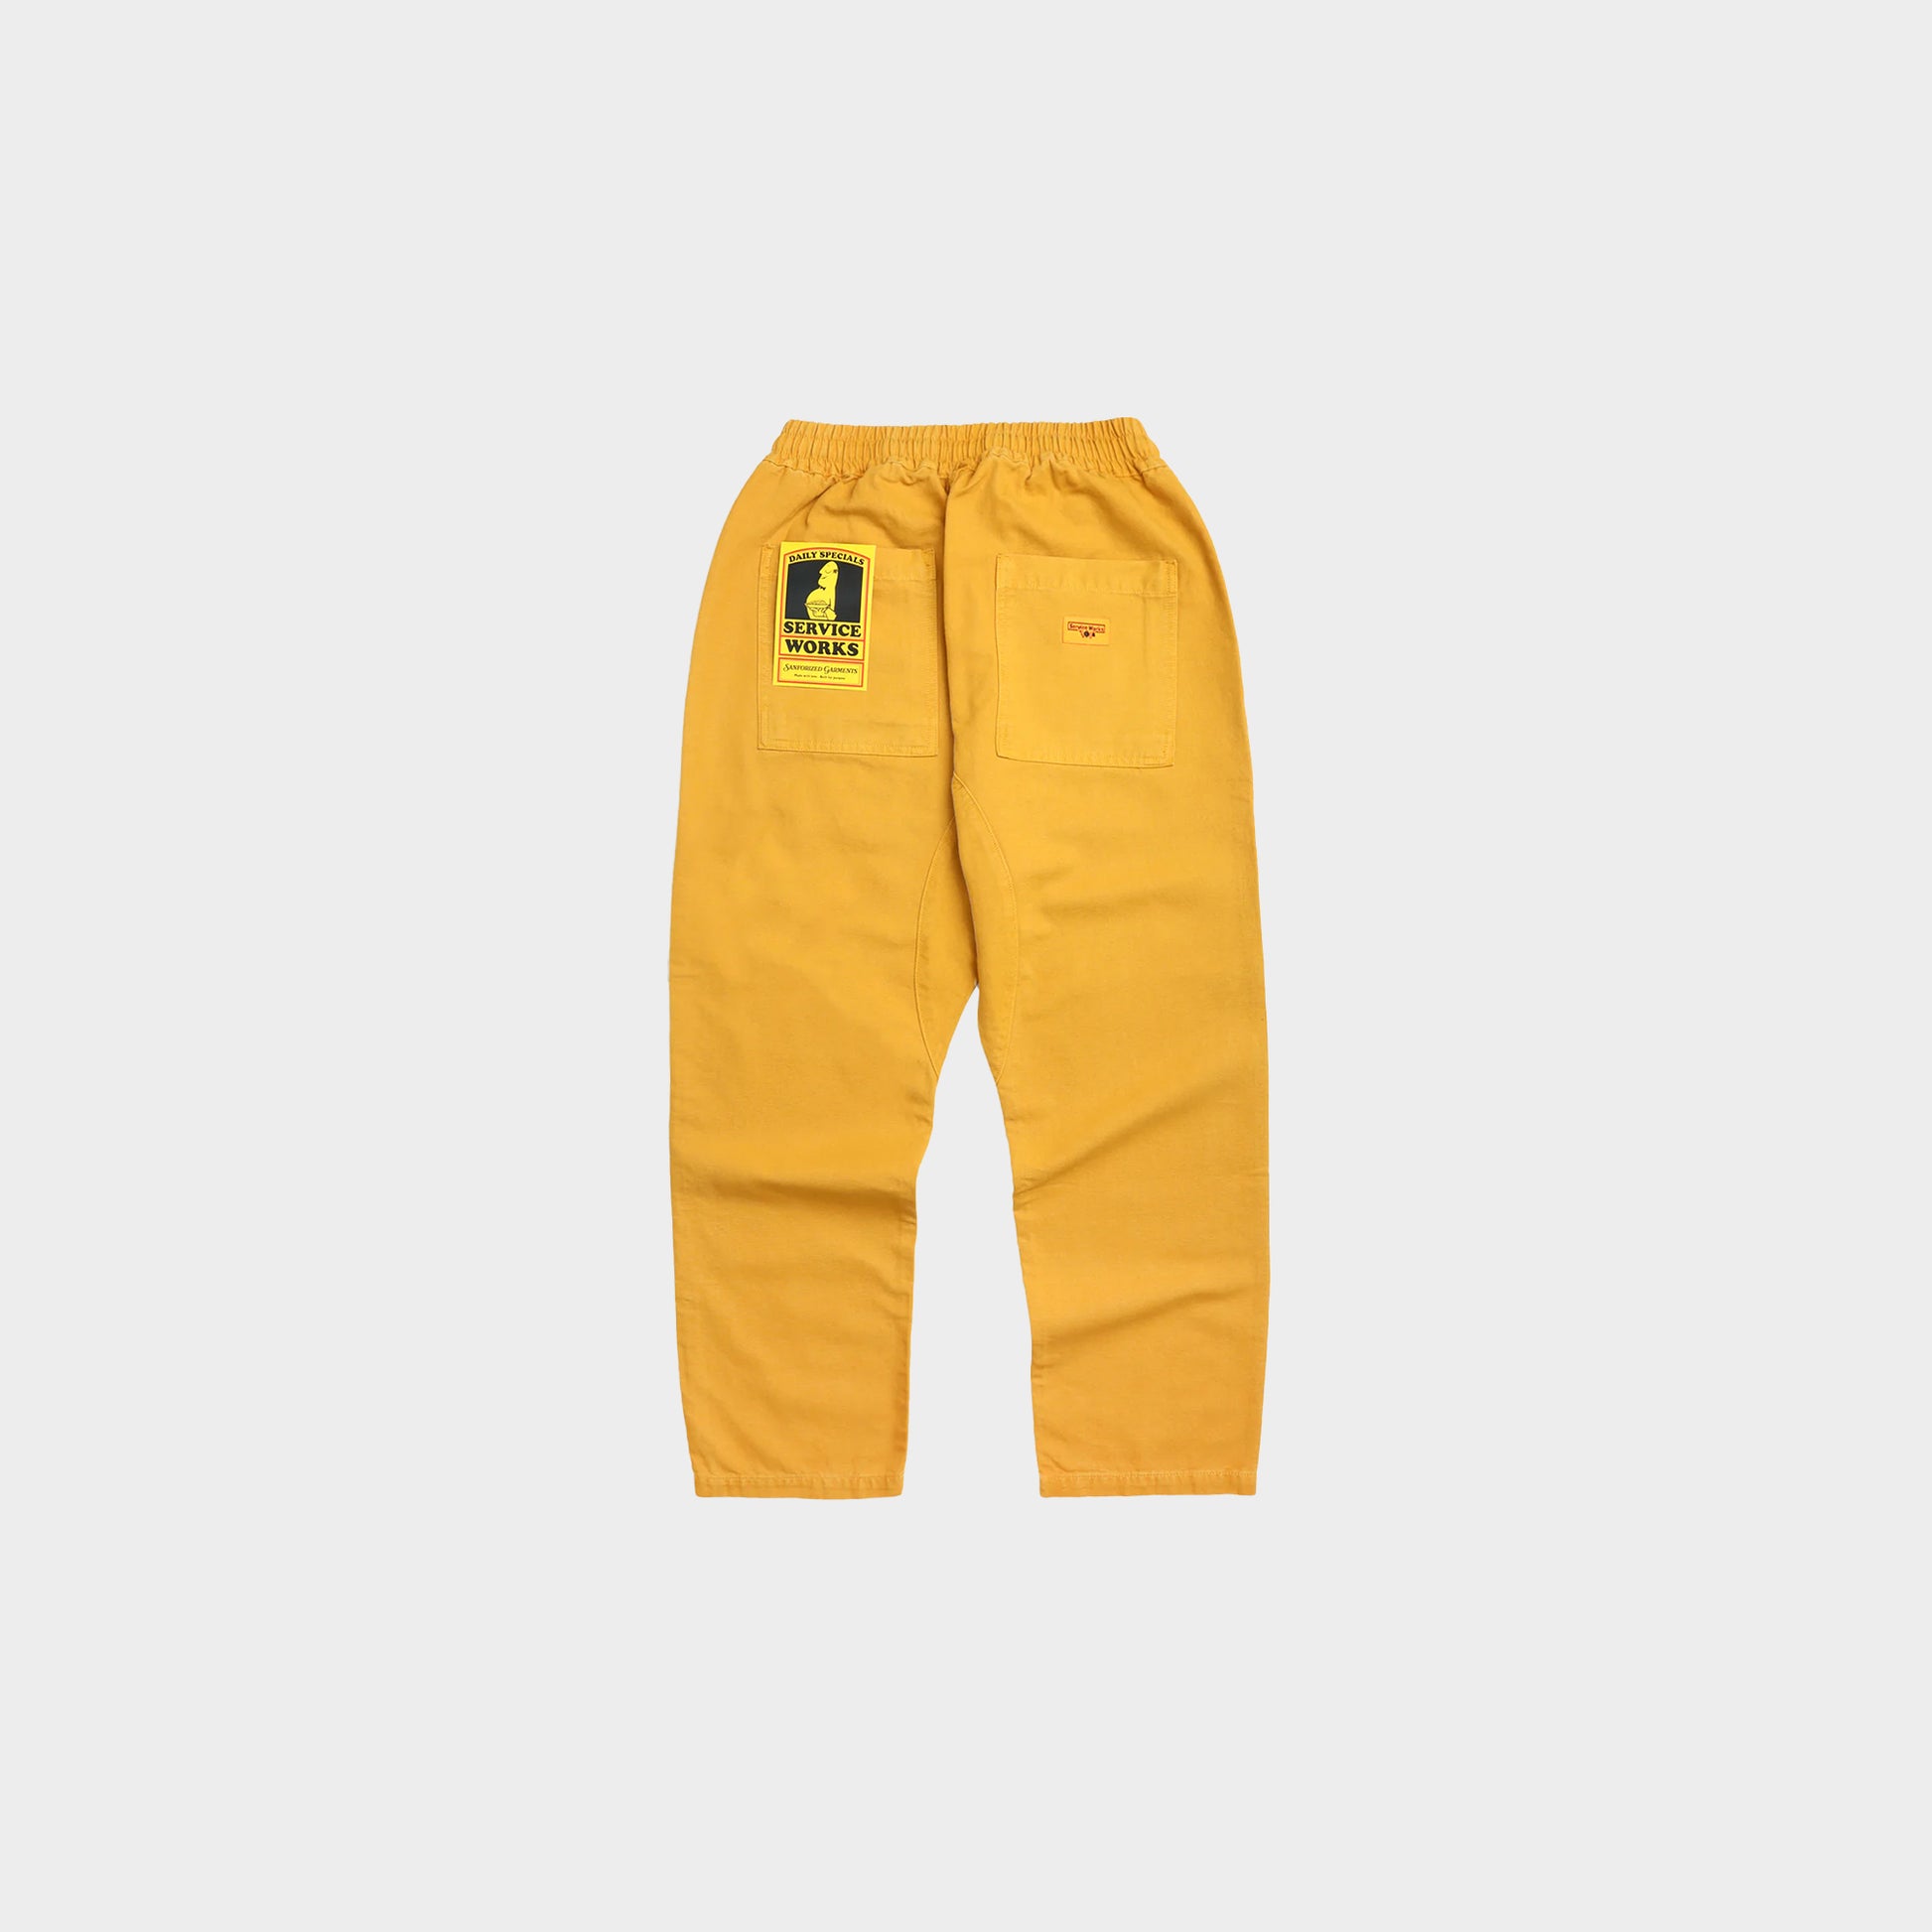 Service Works Canvas Chef Pants in Farbe gold